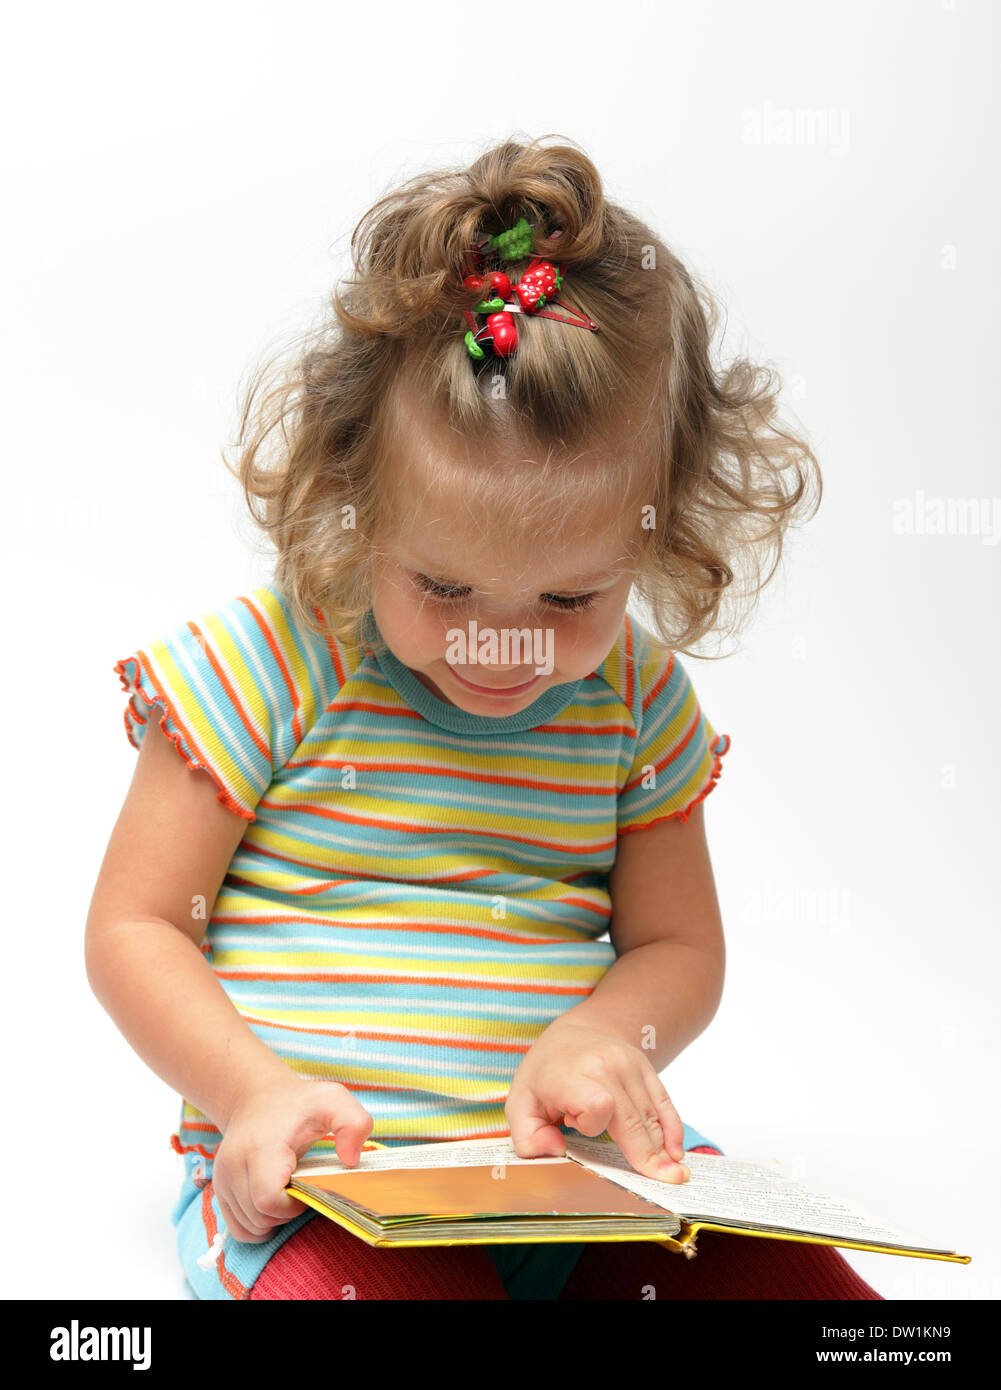 Cute little Girl with book Banque D'Images